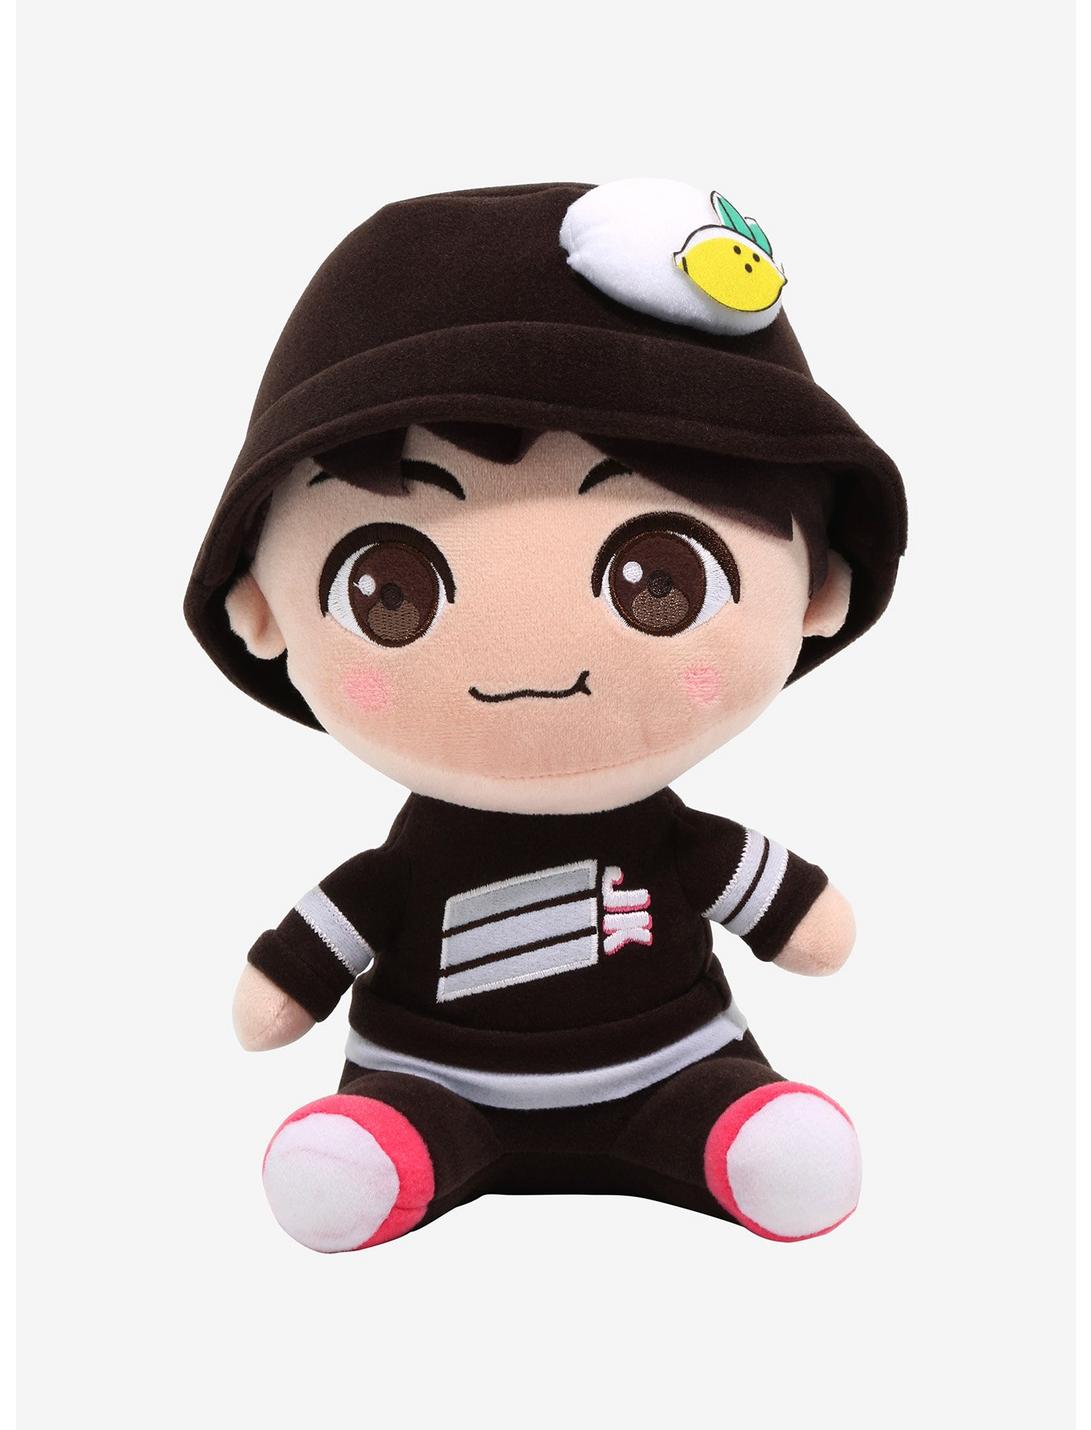 TinyTAN Sweet Time Jung Kook Plush Inspired By BTS, , hi-res